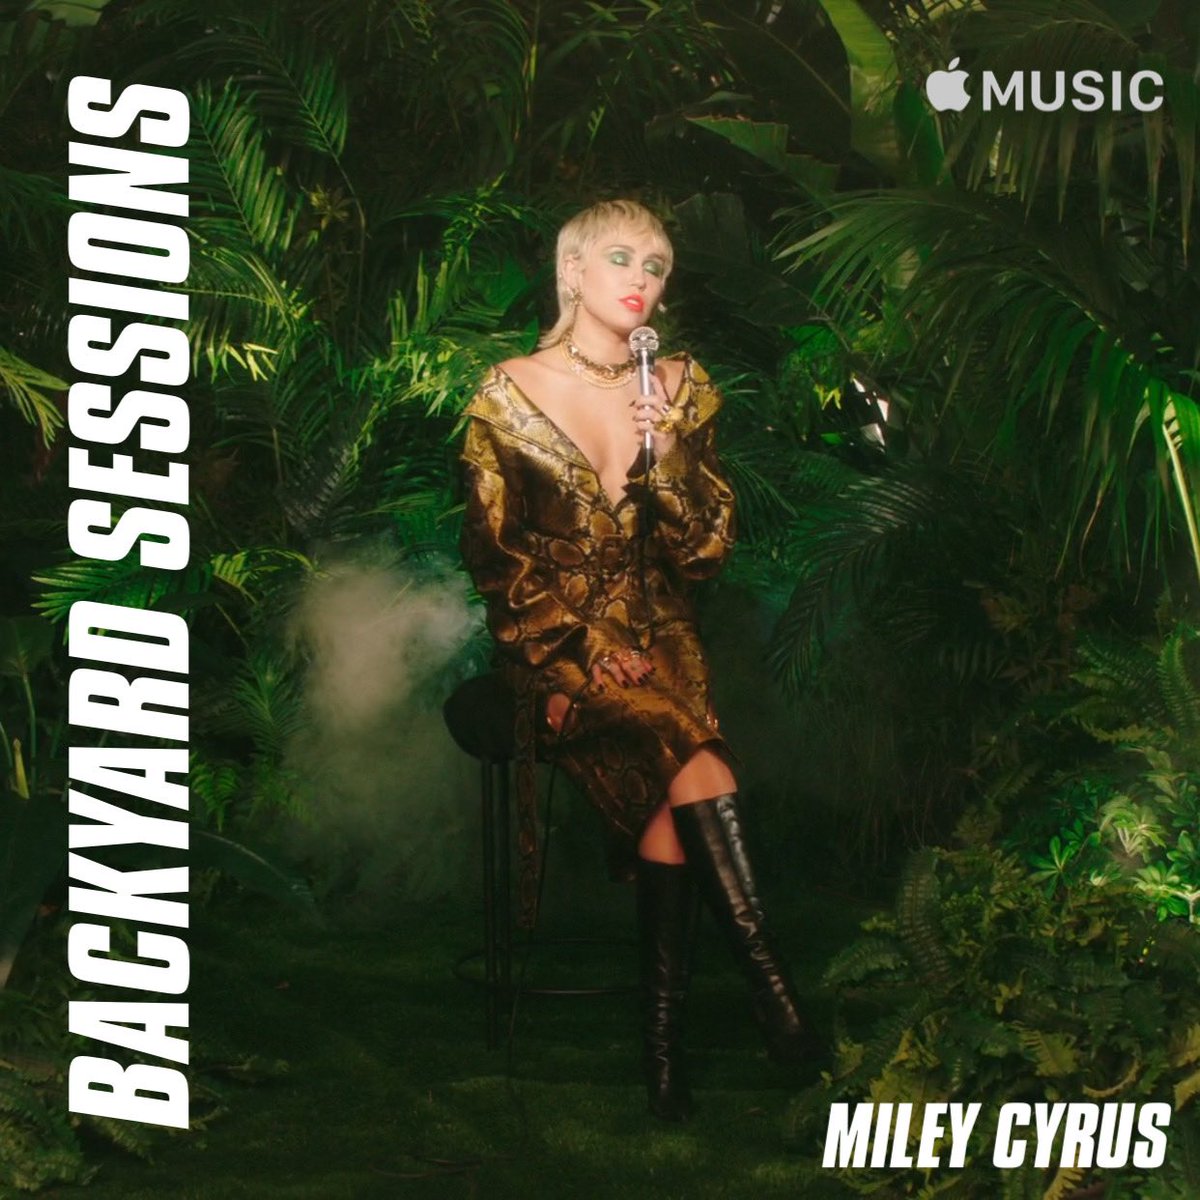 🎸 FIRST 4 #MILEYCYRUS #BACKYARDSESSIONS AUDIO ALBUMS 🎸

If enough people want them I’ll upload them. 💿